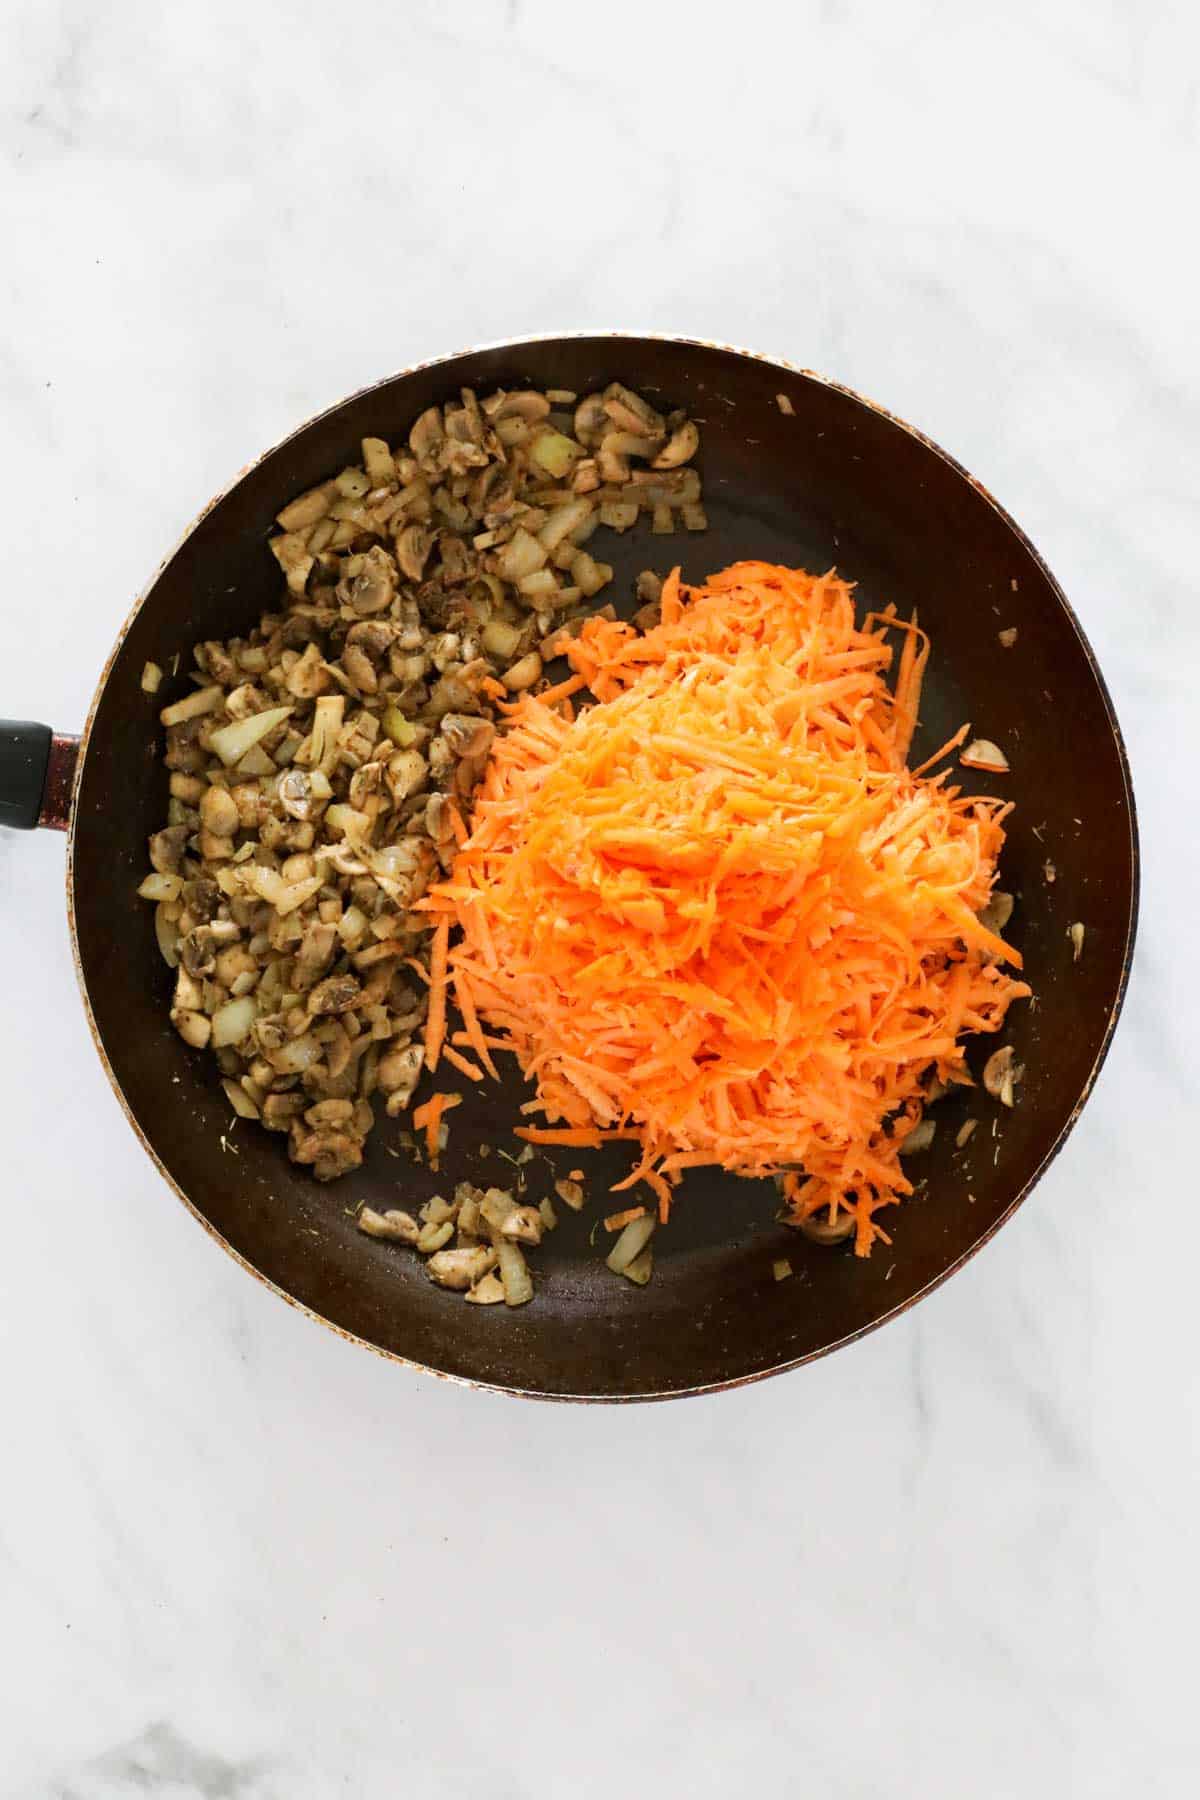 Grated sweet potato and grated carrot added to cooked mushrooms and onion in a frying pan.